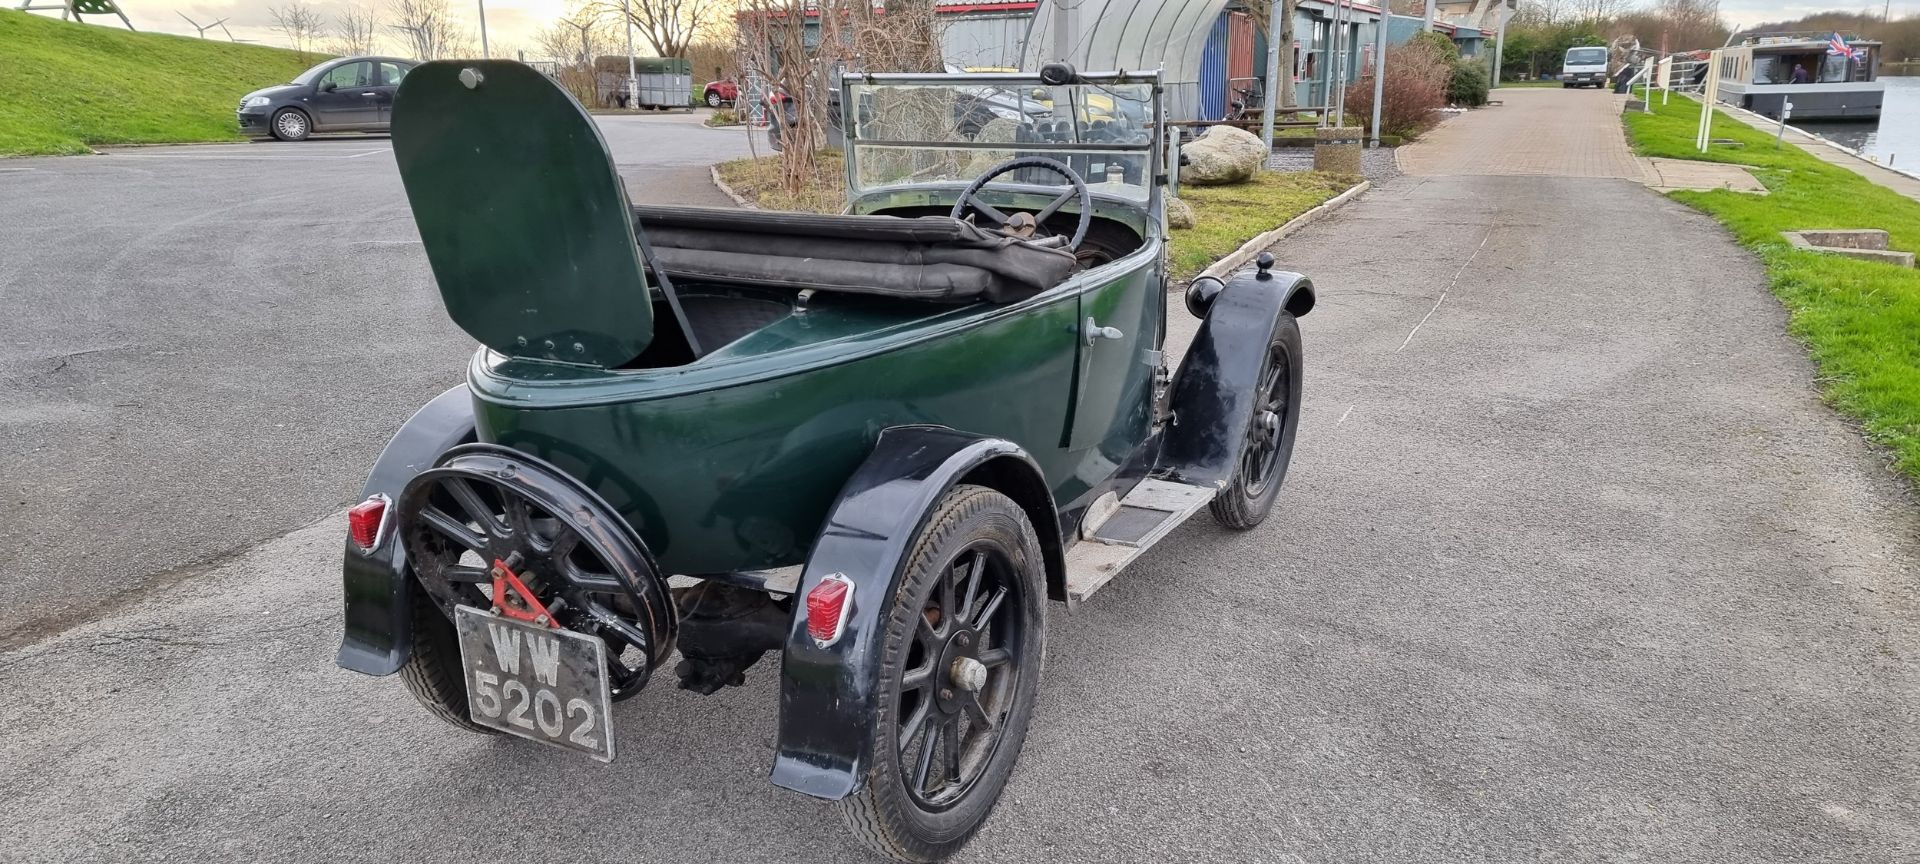 1928 Triumph Super Seven two seater de Luxe, 832cc. Registration number WW 5202. Chassis number - Image 4 of 26